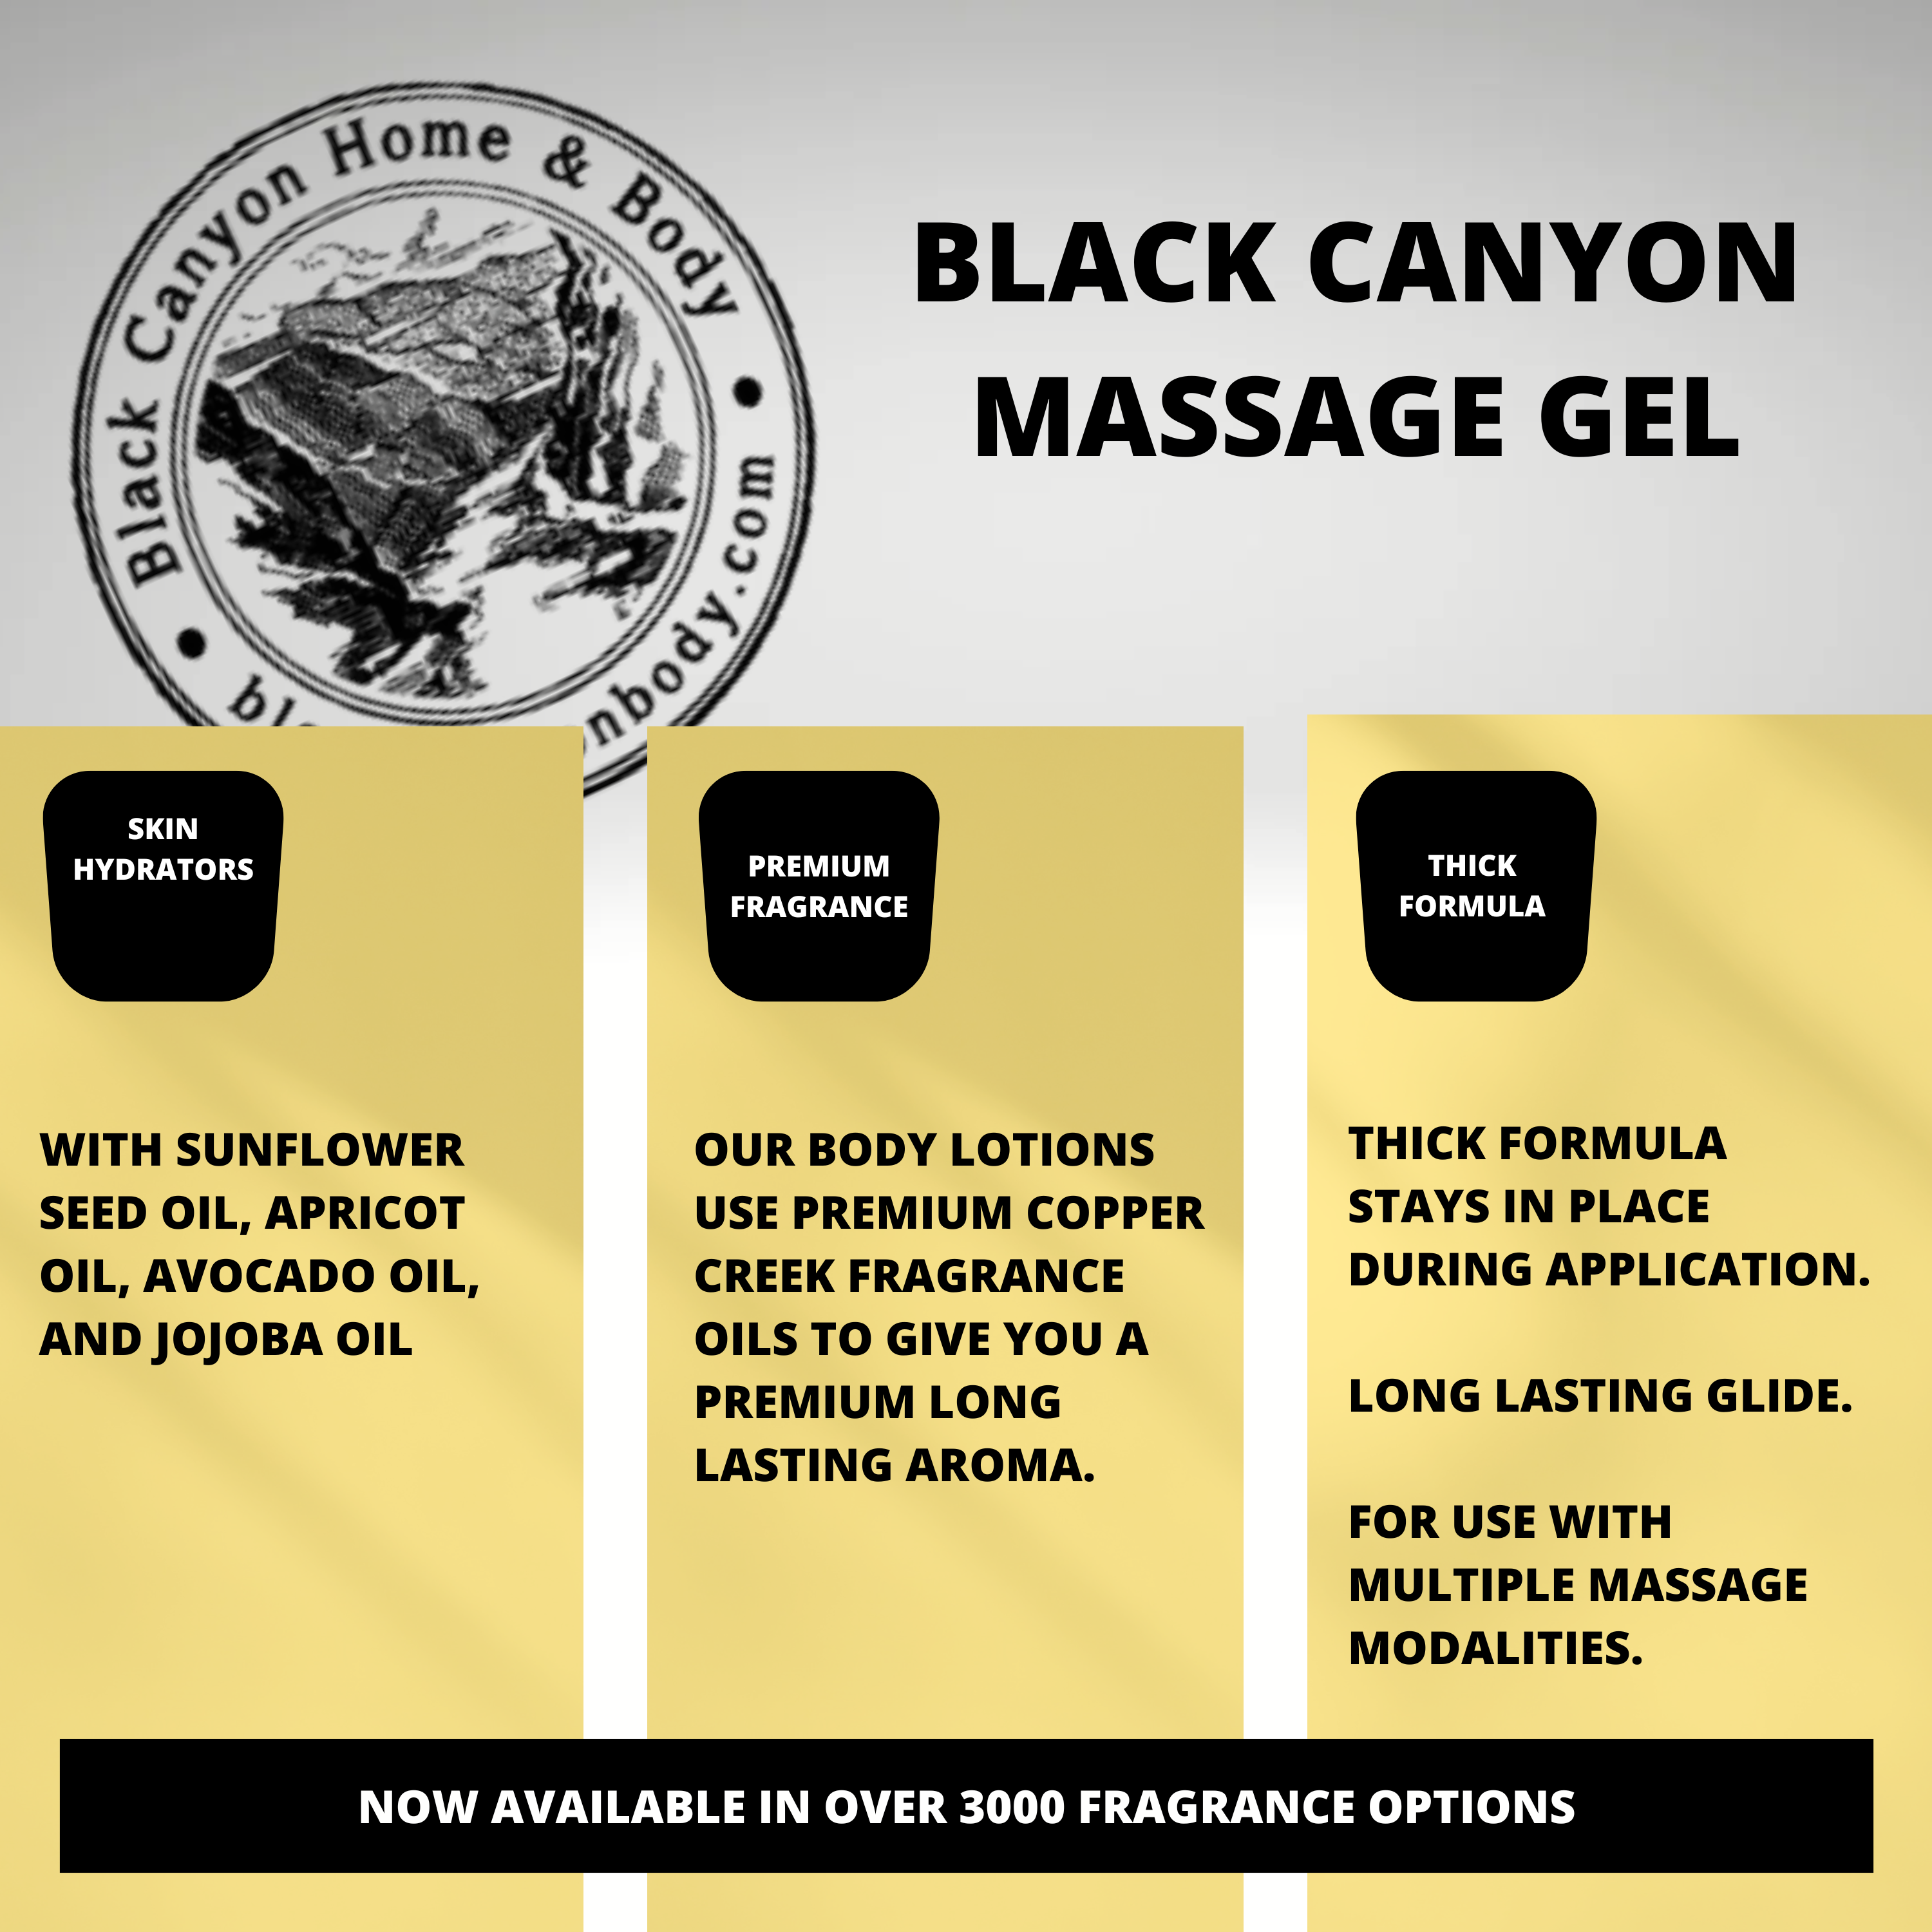 Black Canyon Berry Passion Scented Massage Gel